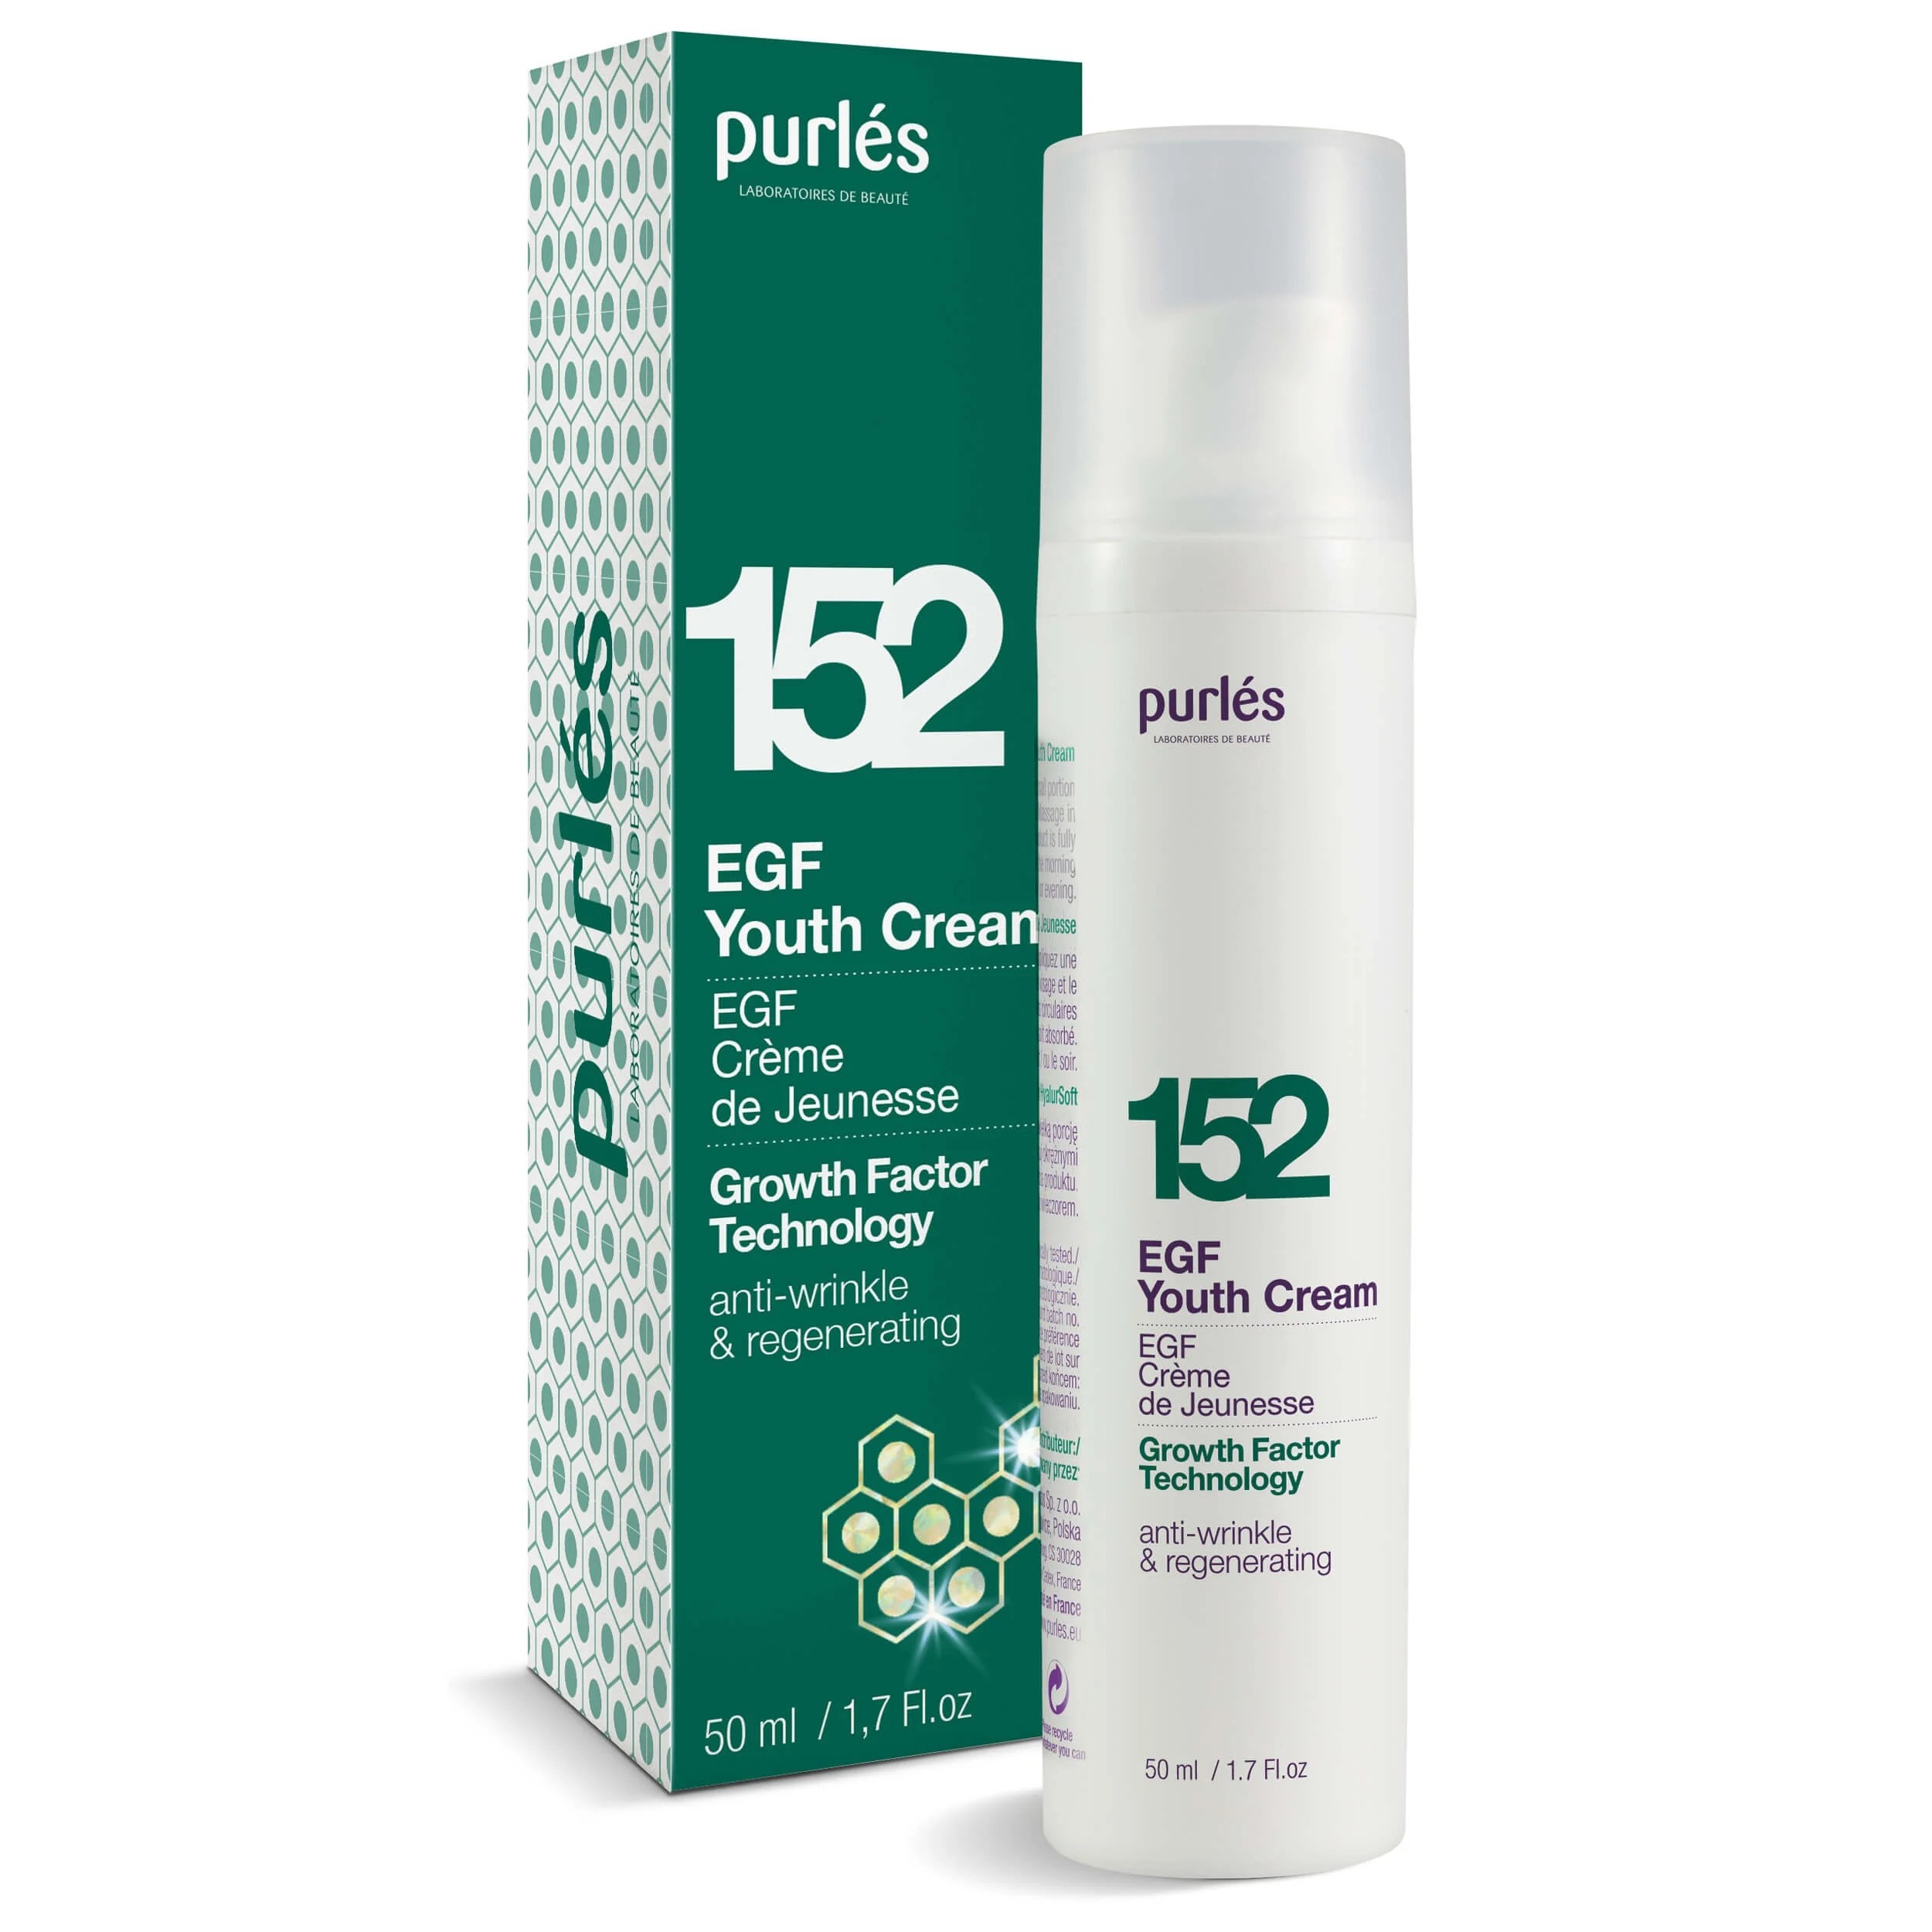 Purles 152 Growth Factor Technology EGF Youth Cream Intensive Regeneration & Anti Wrinkle Formula 50ml